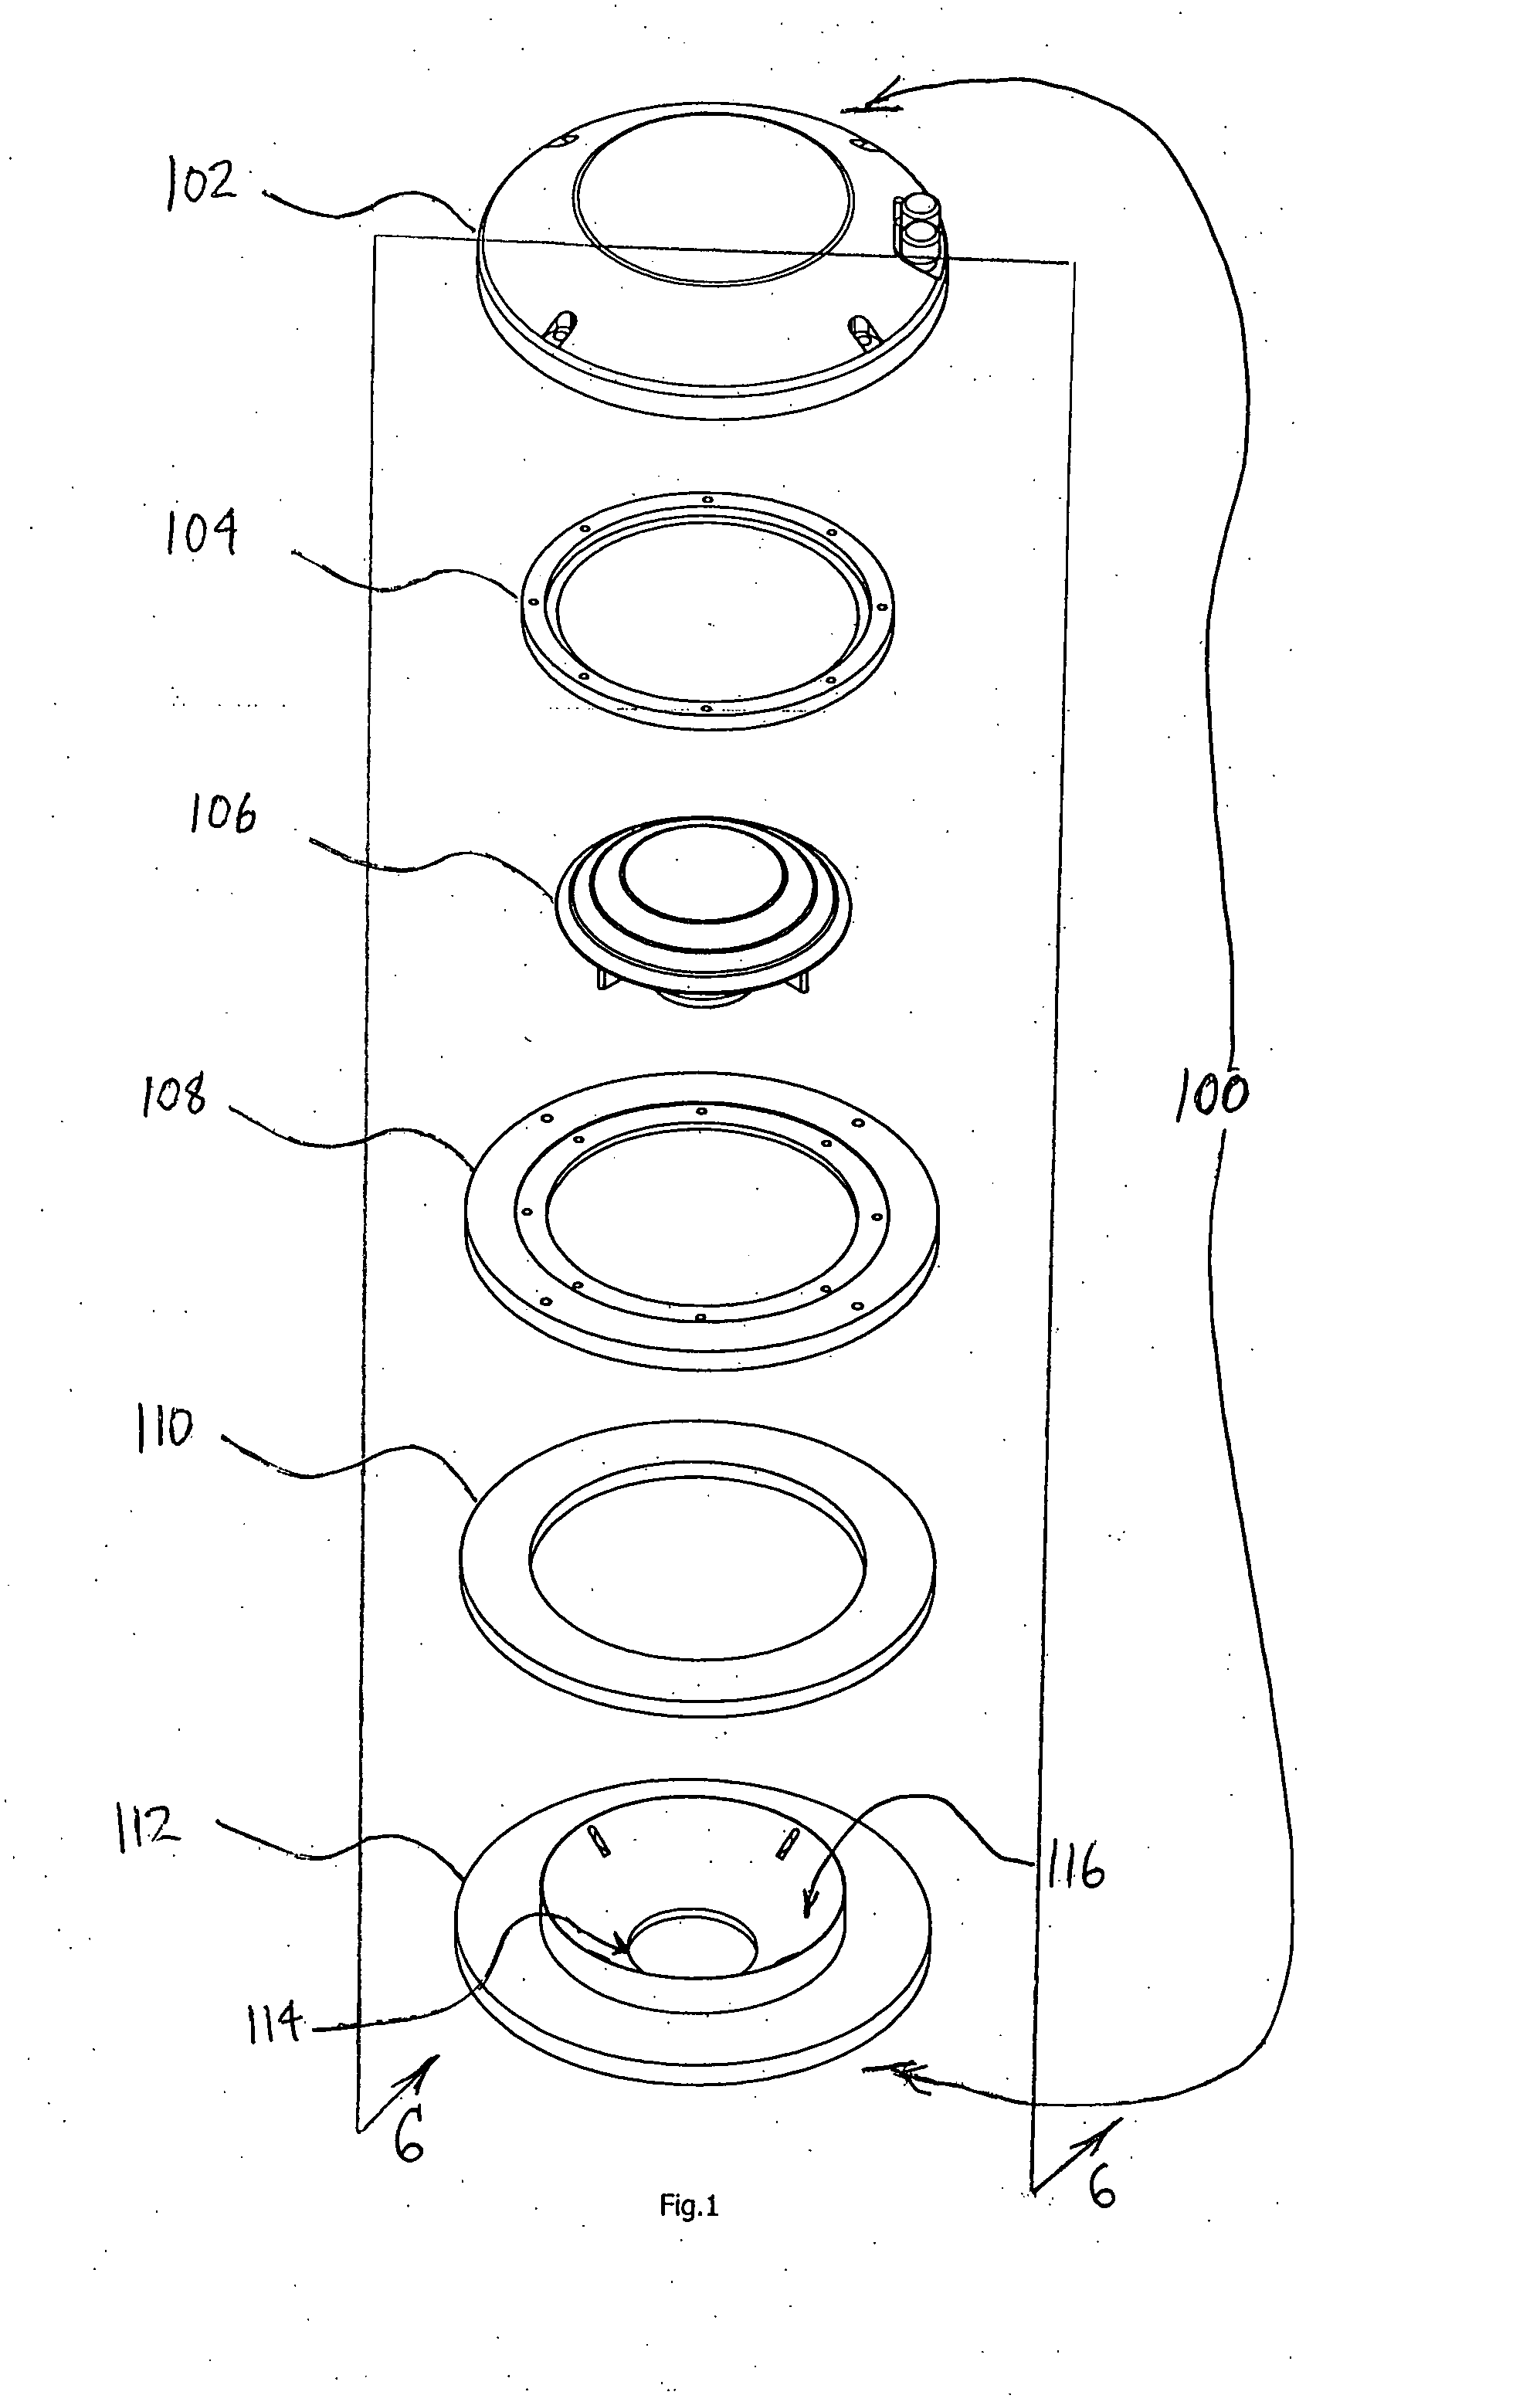 Phasing plug for acoustic compression drivers